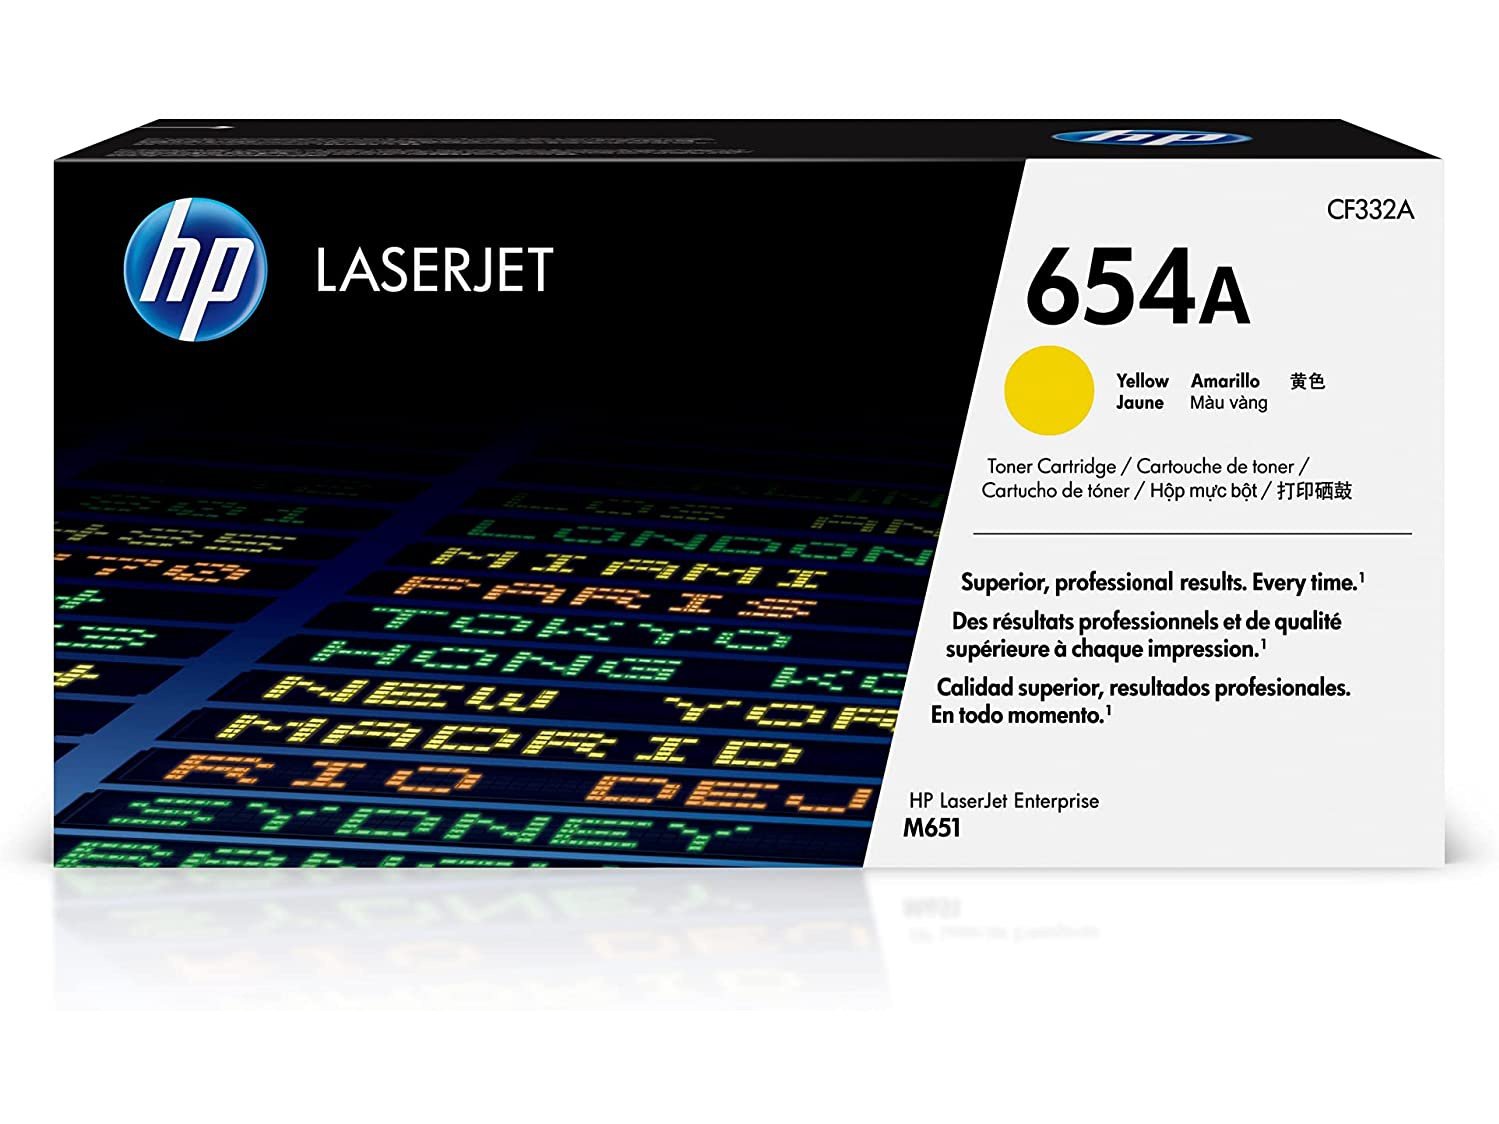 ICU Compatible/ OEM Get HP ICUCF332A Yields 15000 Pages Compatible CF332A Toner Cartridge Yellow - 654A